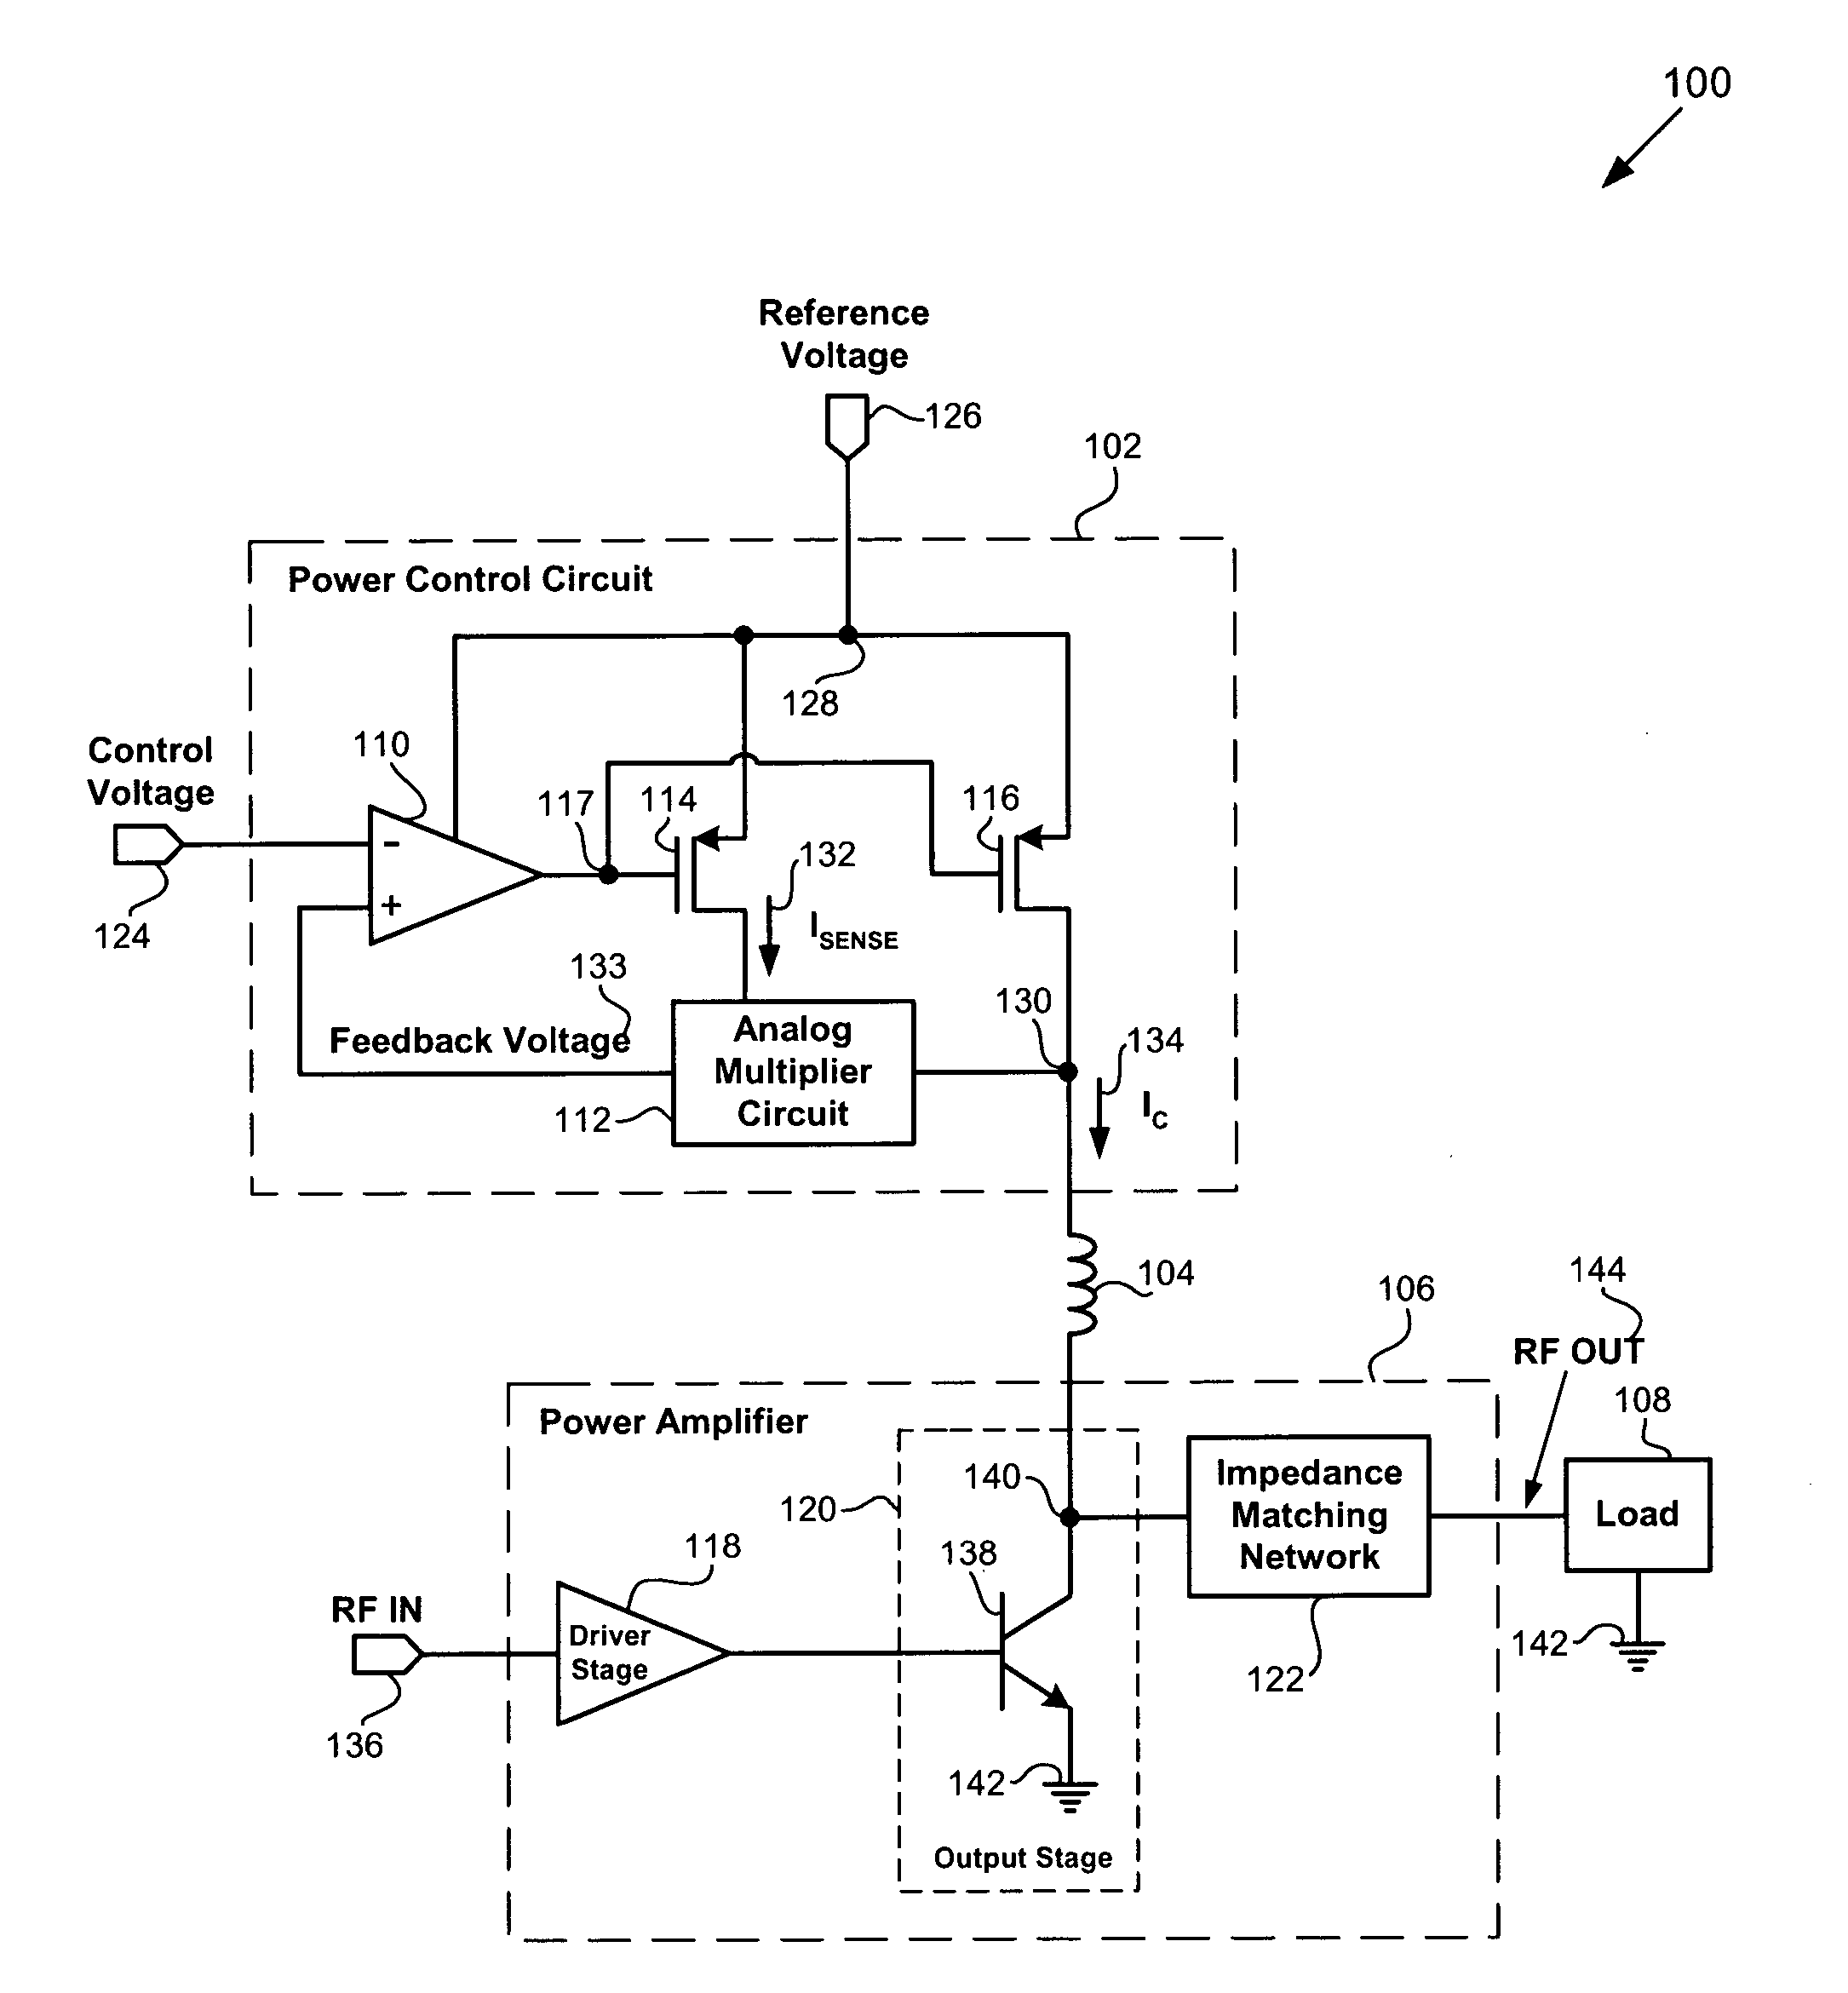 Power control circuit for accurate control of power amplifier output power